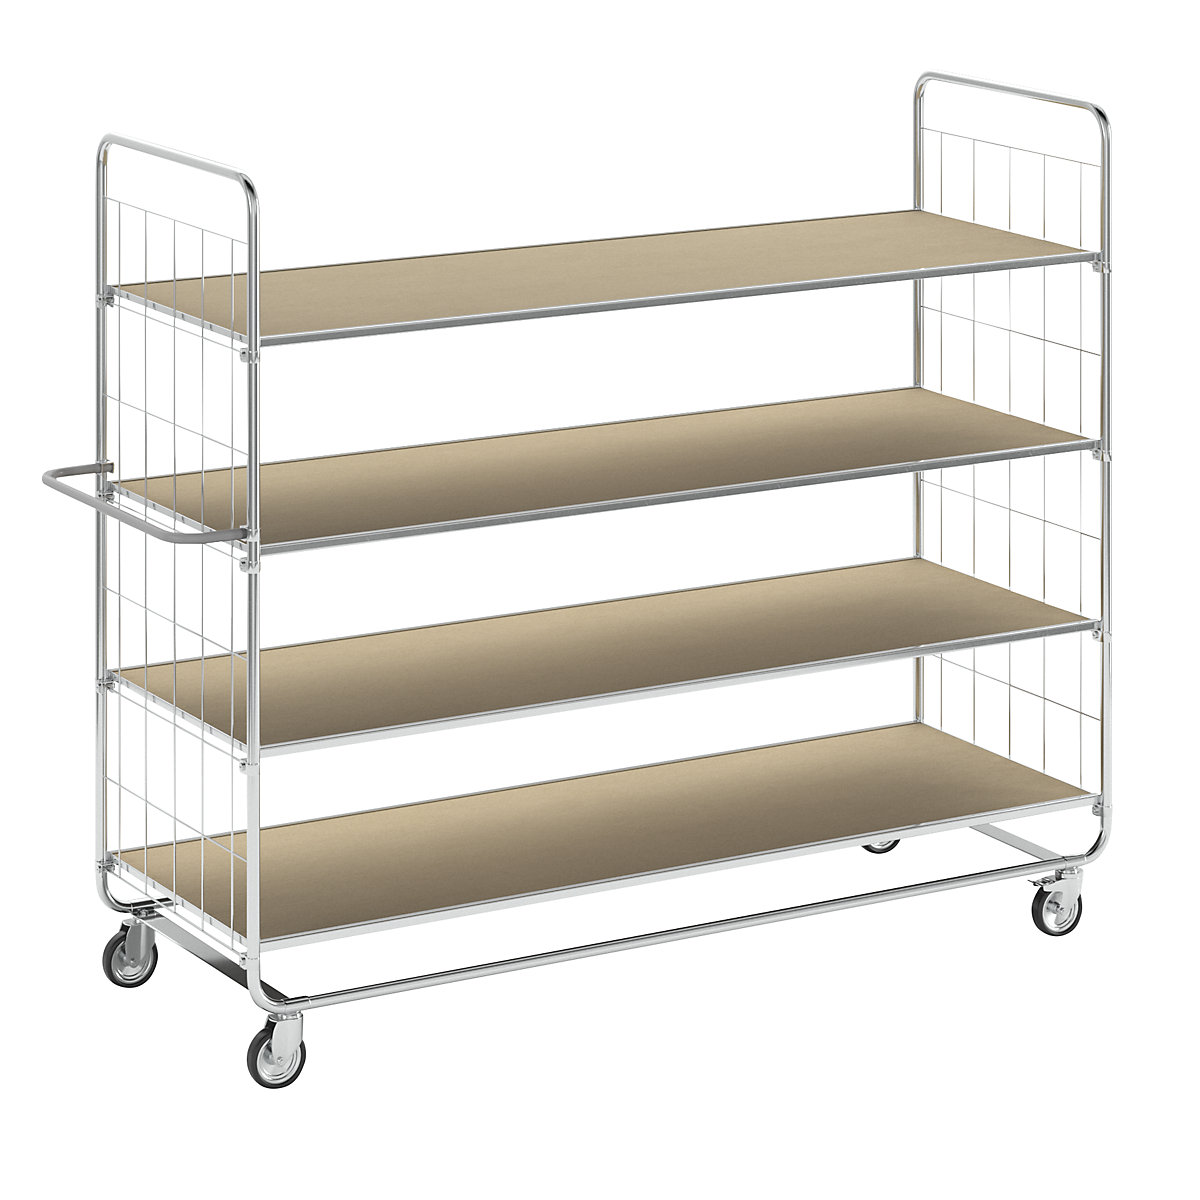 ESD shelf truck, with 4 shelves – Kongamek, 4 castors, 2 with stops, LxWxH 1395 x 470 x 1120 mm, 5+ items-5